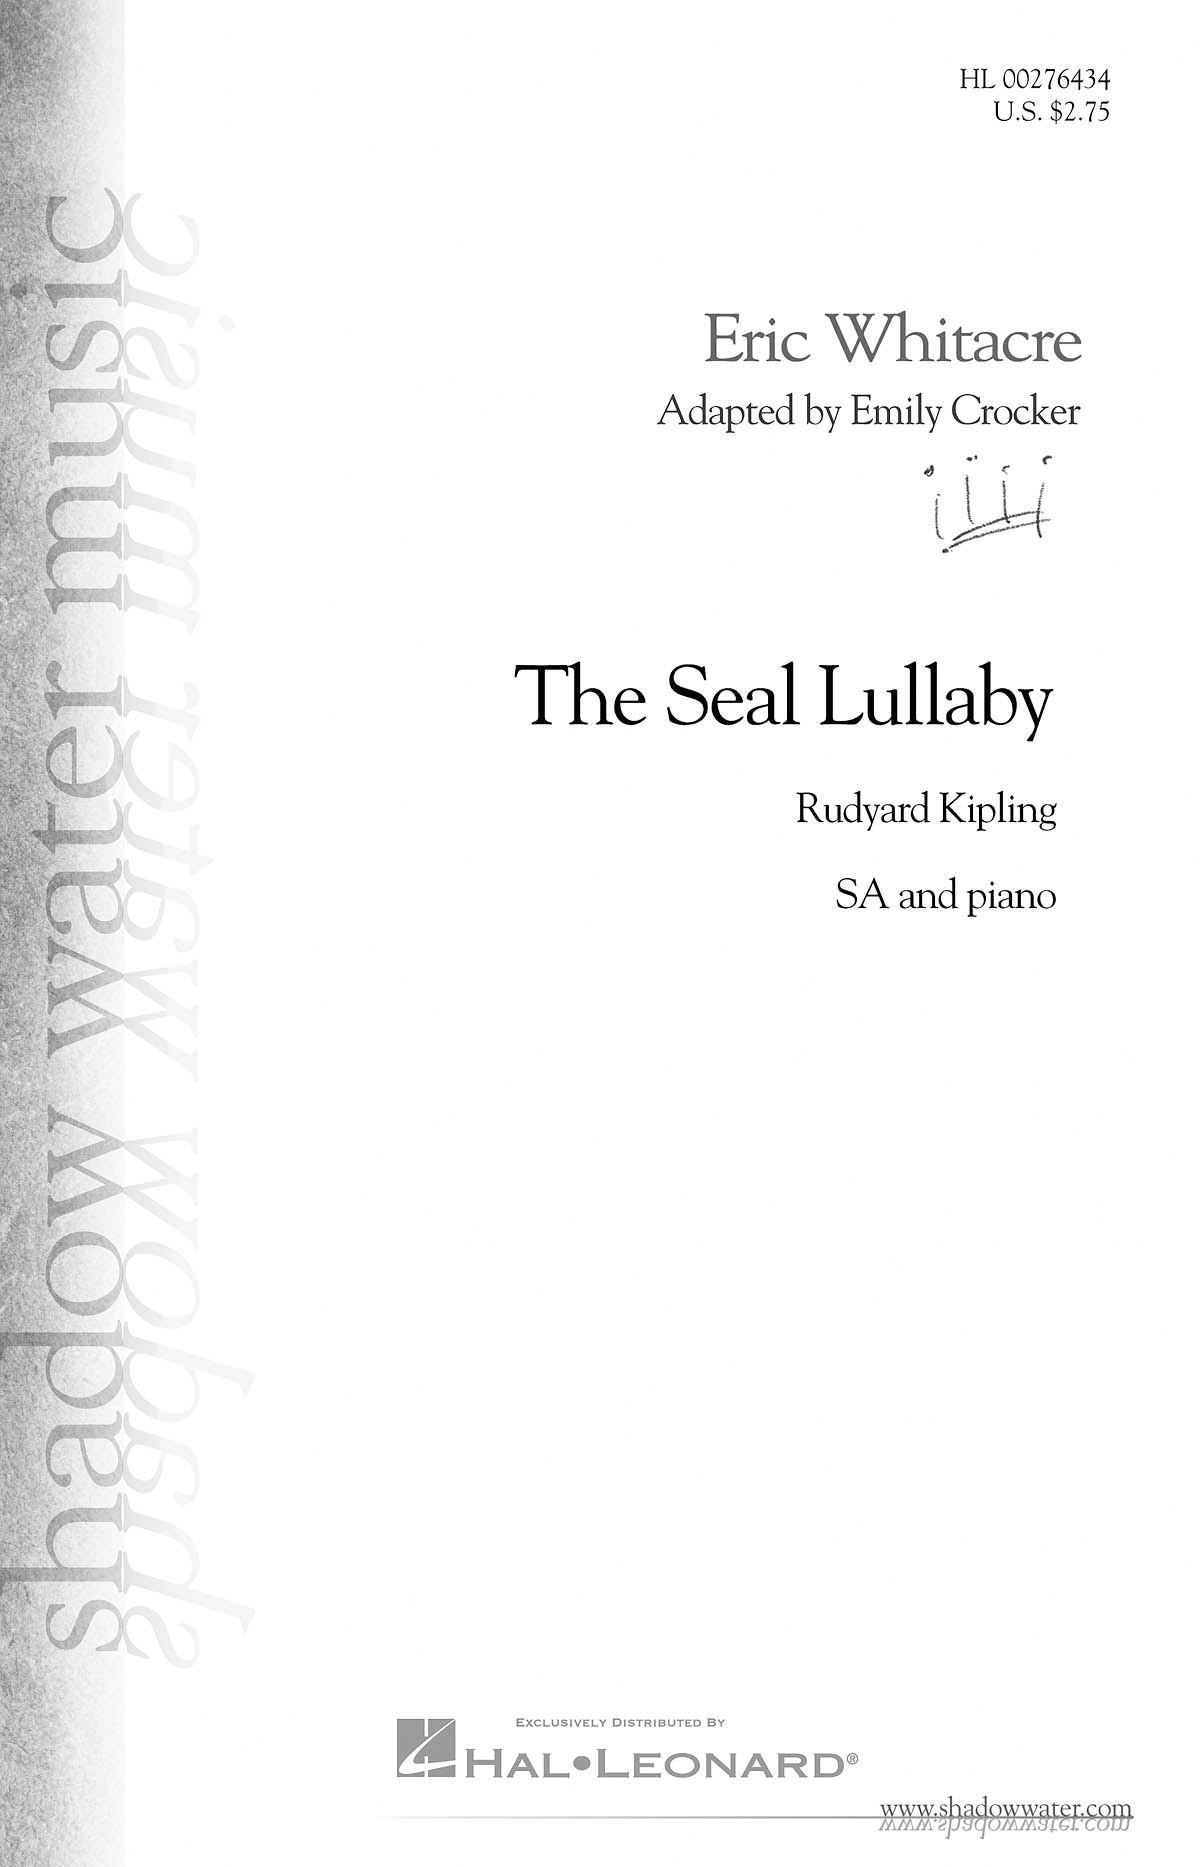 Eric Whitacre: The Seal Lullaby: Upper Voices a Cappella: Vocal Score